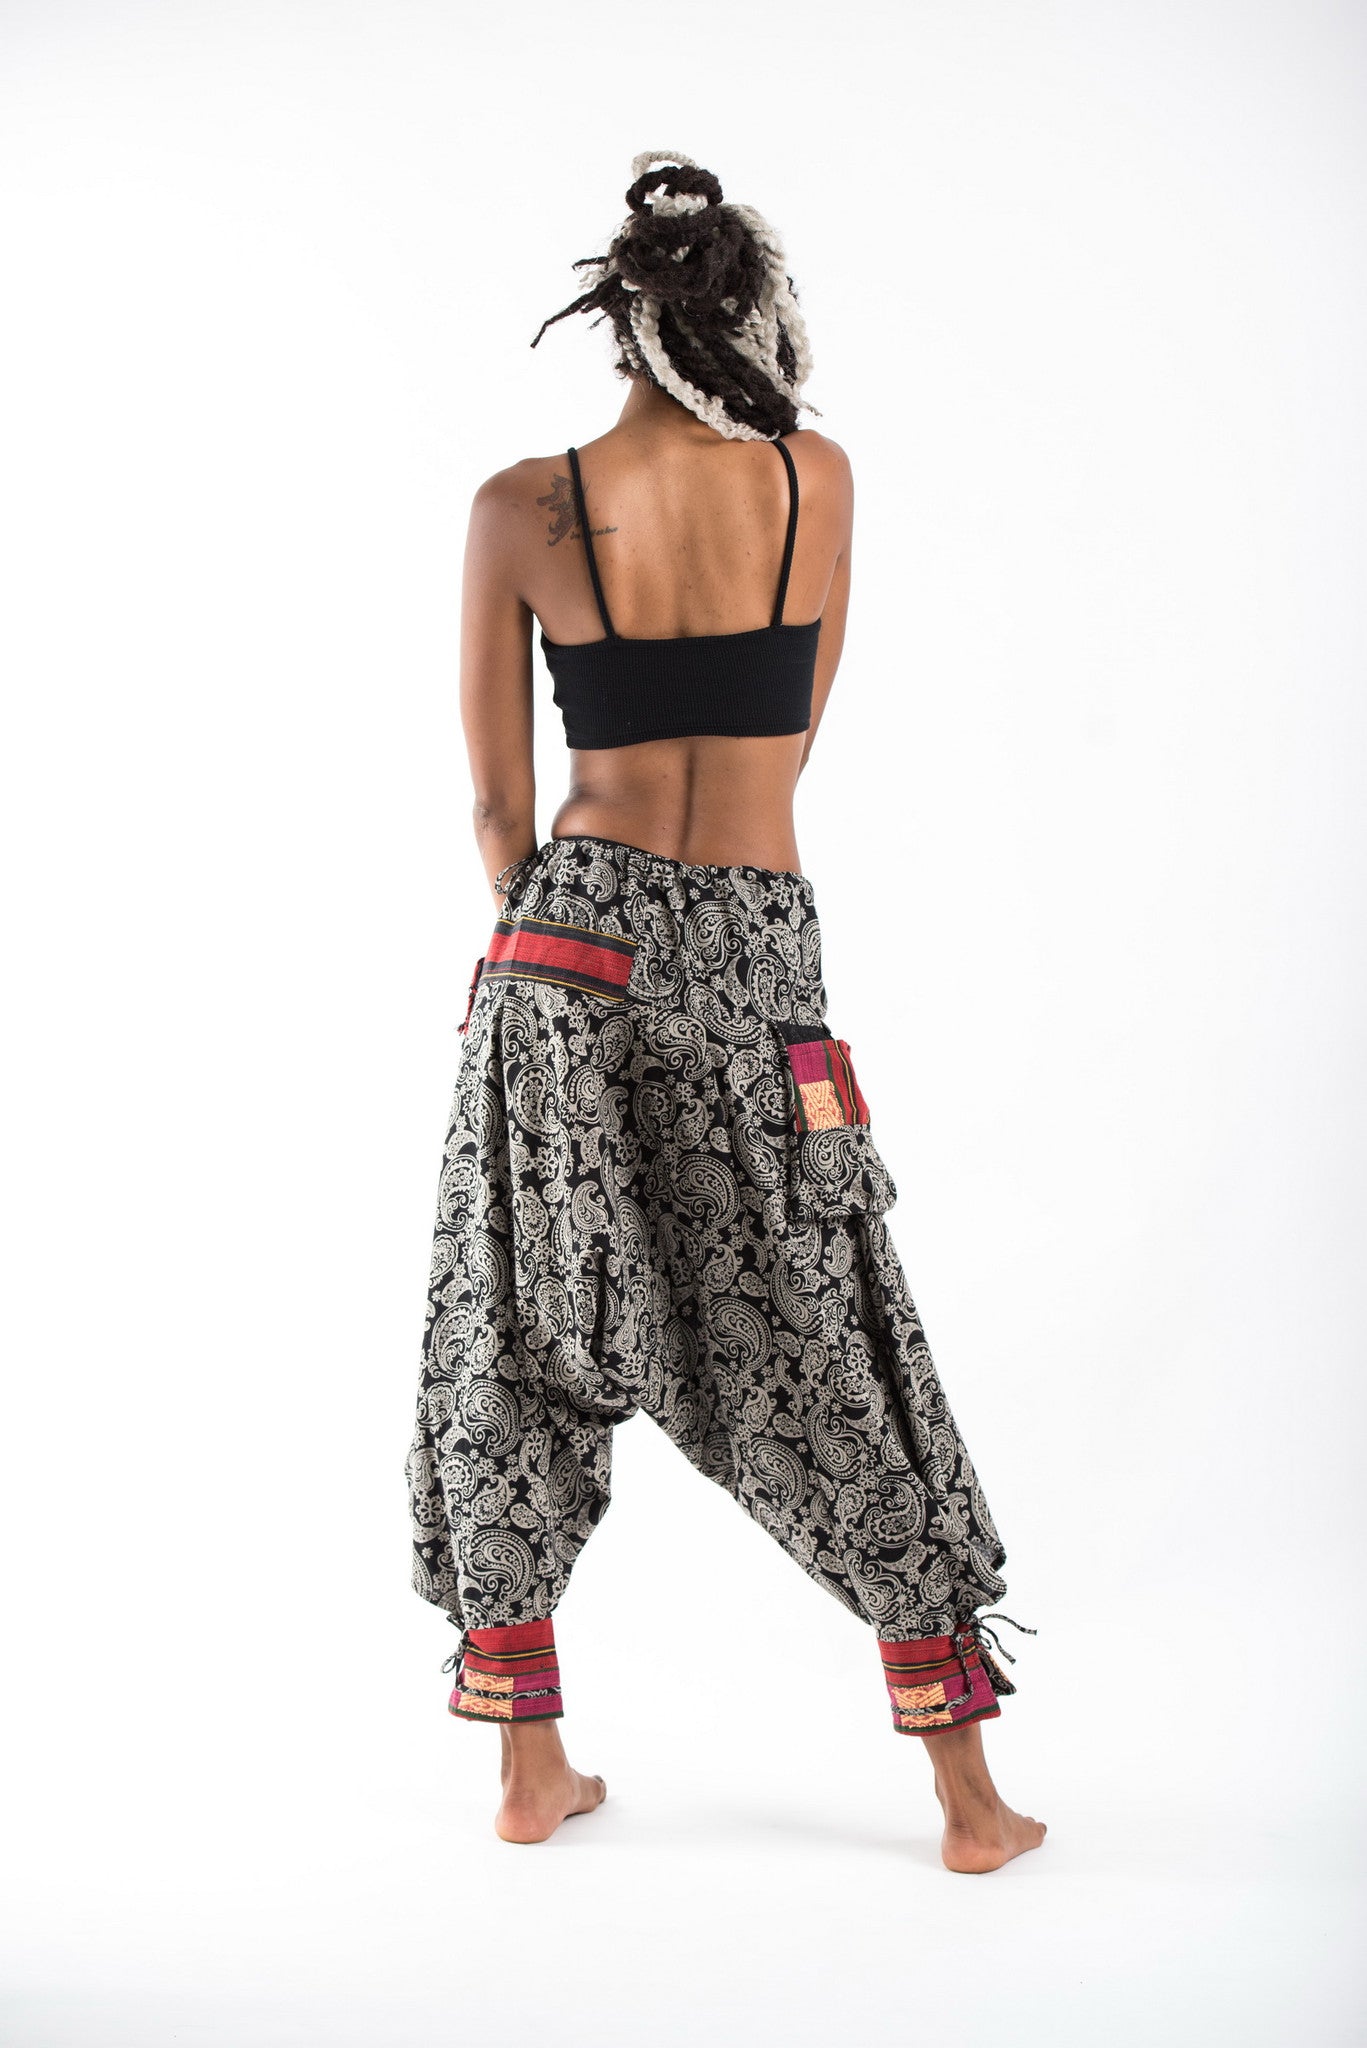 Paisley Thai Hill Tribe Fabric Women's Harem Pants with Ankle Straps